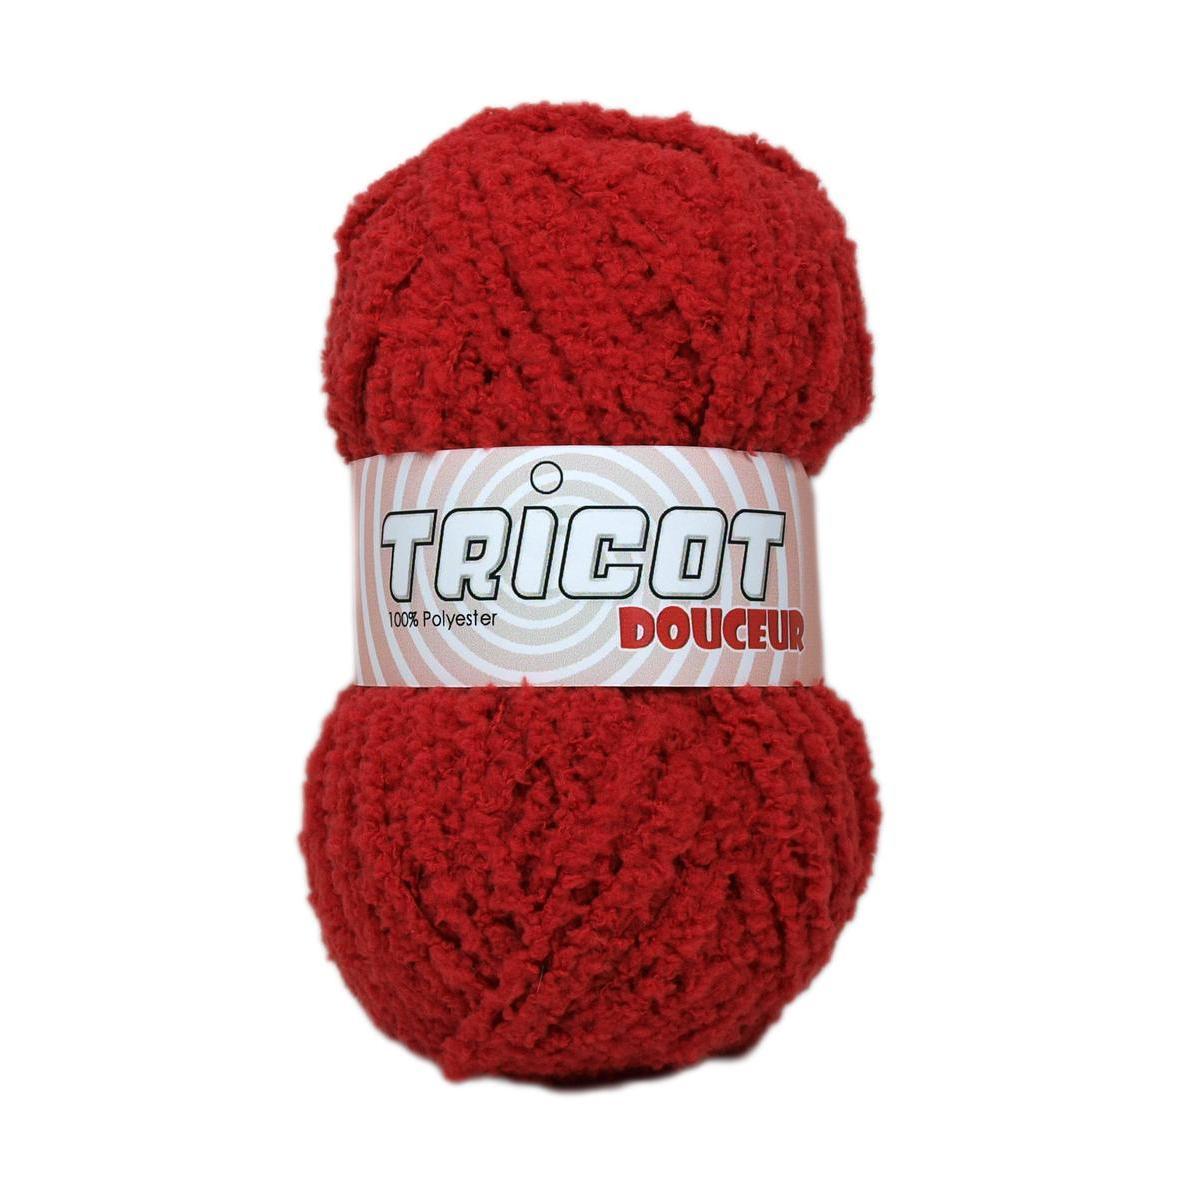 Pelote Douceur - 100% polyester - 50 g - Rouge